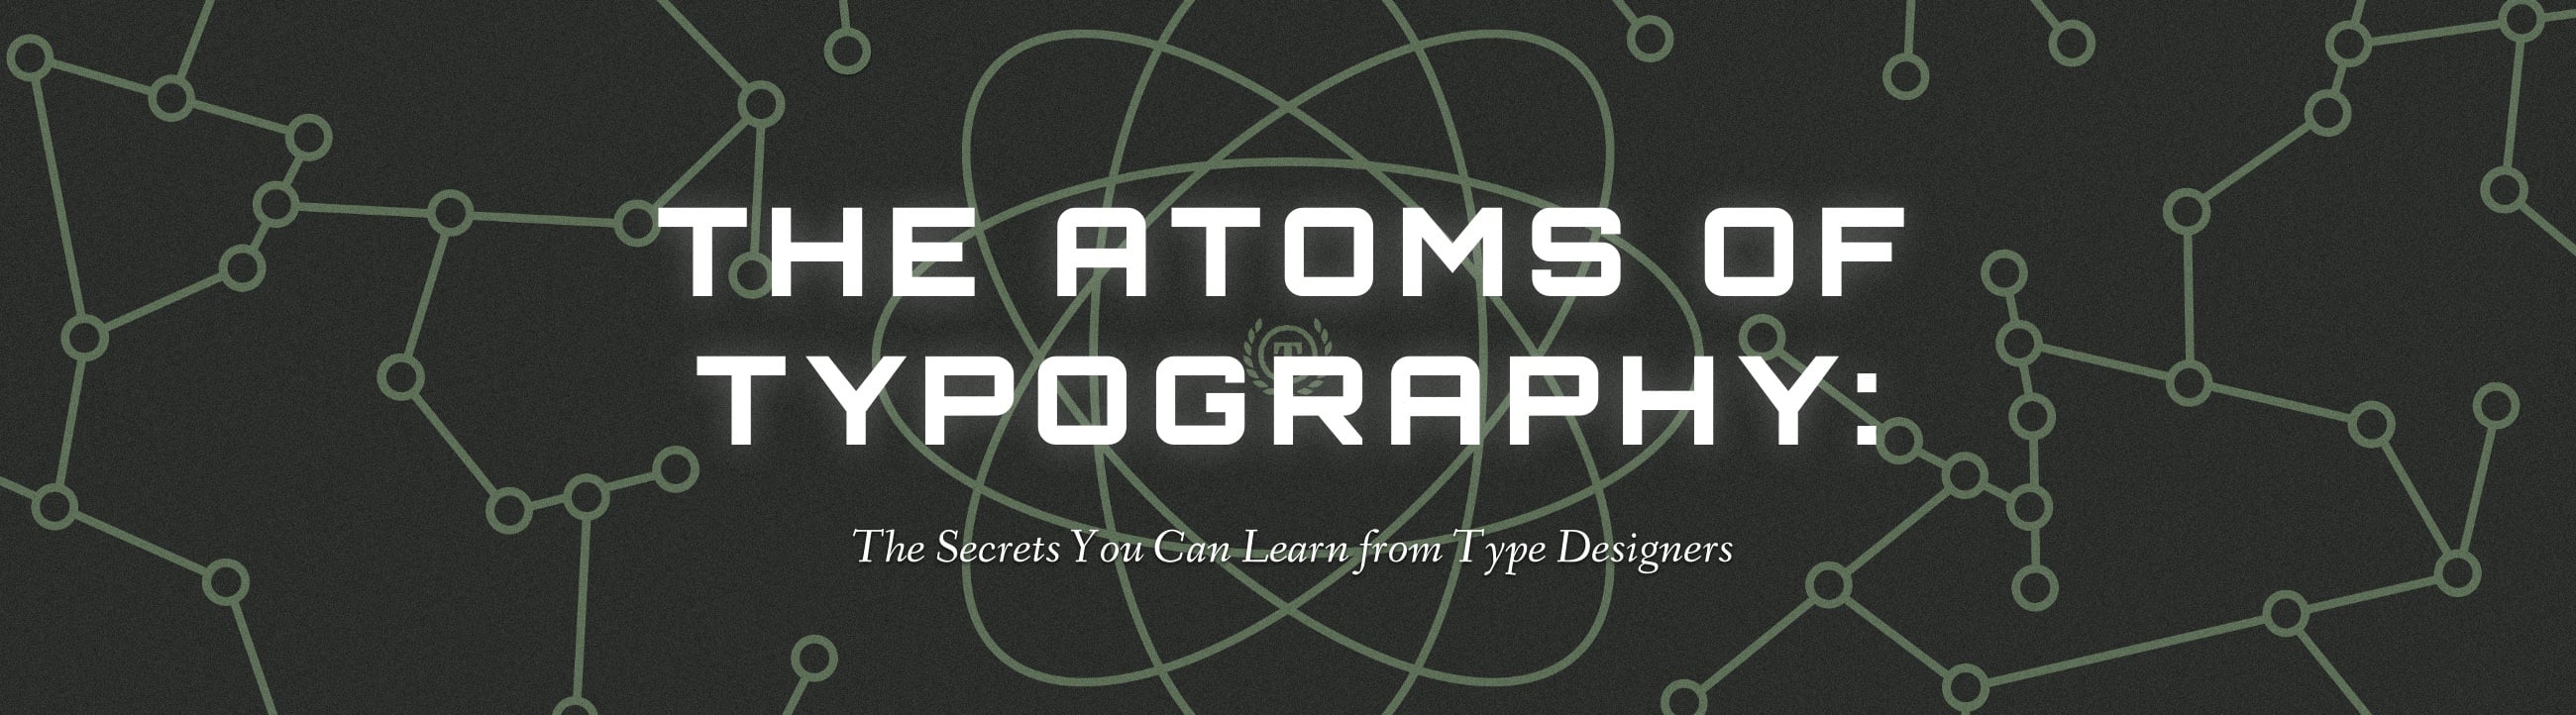 The Atoms of Typography: The Secrets You Can Learn from Type Designers